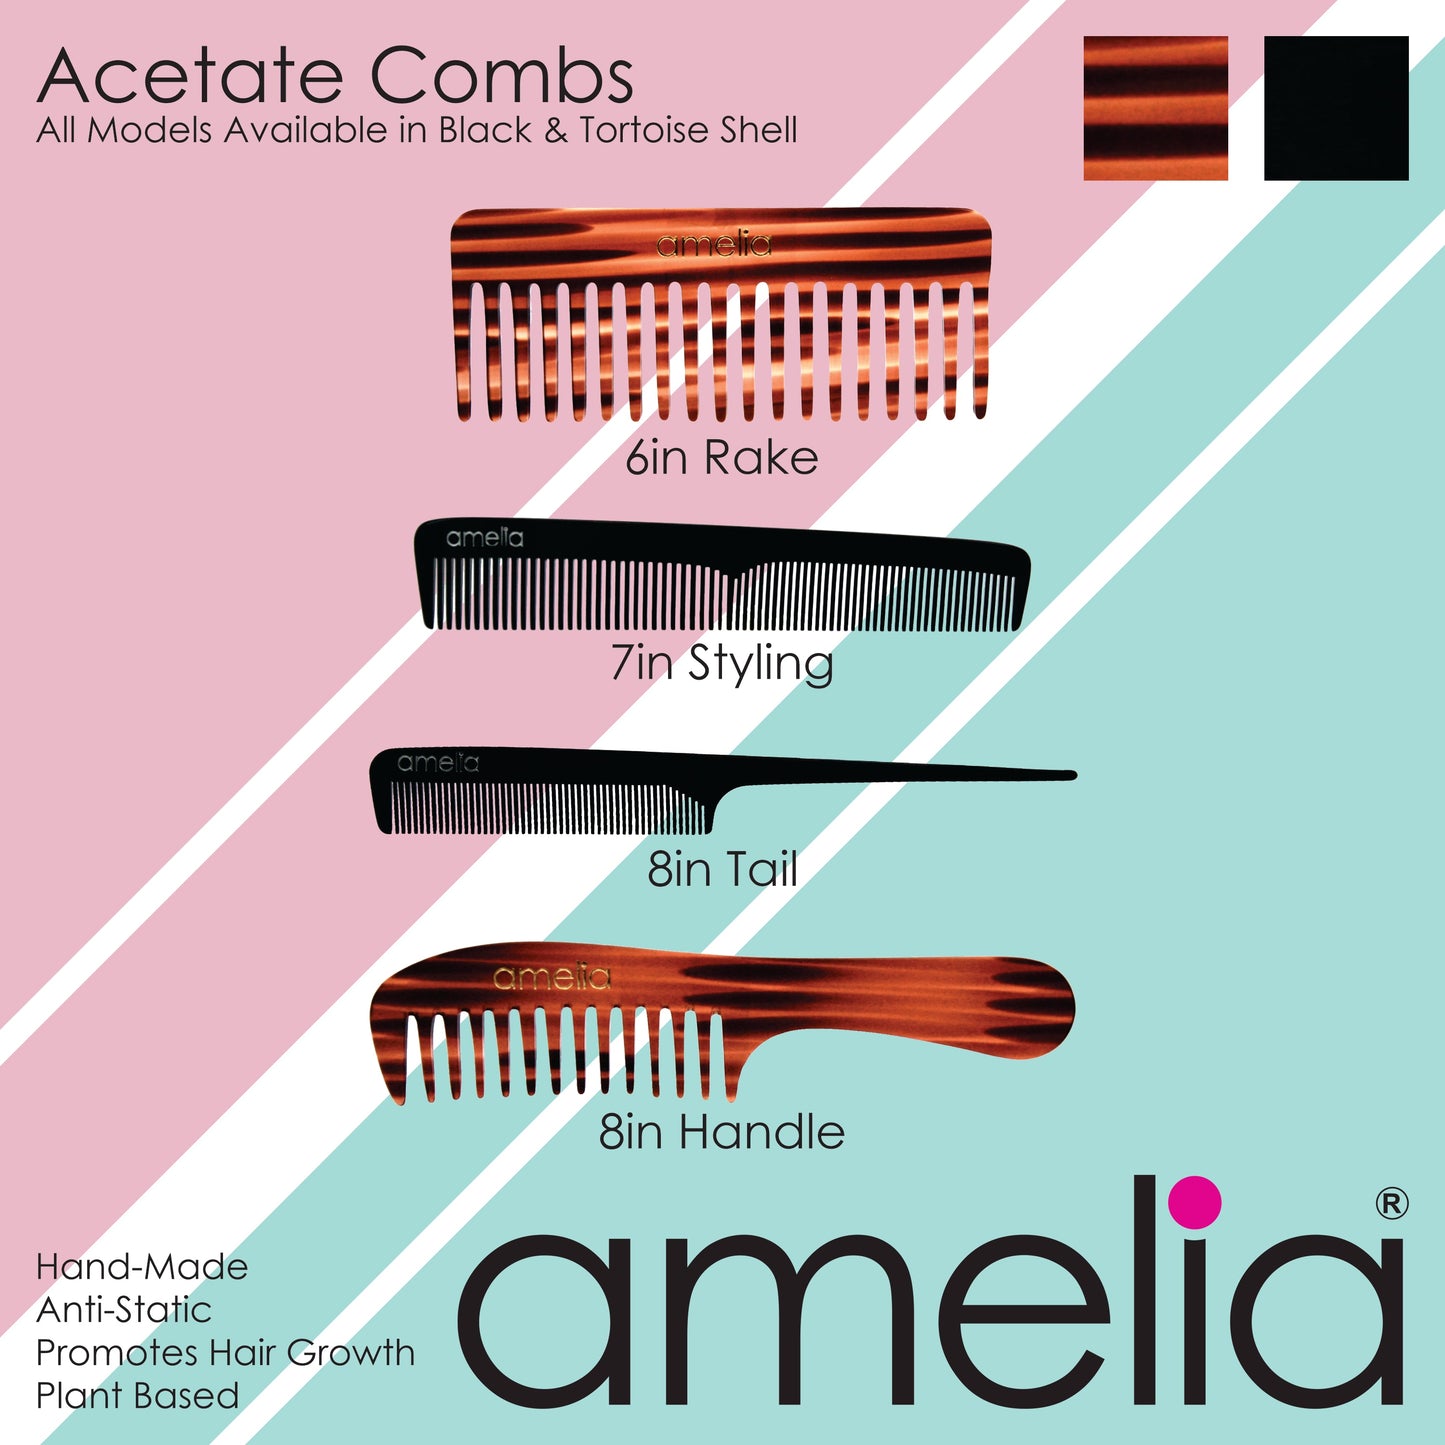 Amelia Beauty Cellulose Acetate 8in Handle Comb, Handmade, Smooth Edges, Eco-Friendly Plant Based Material, Course Tooth - Tortoise Shell Color